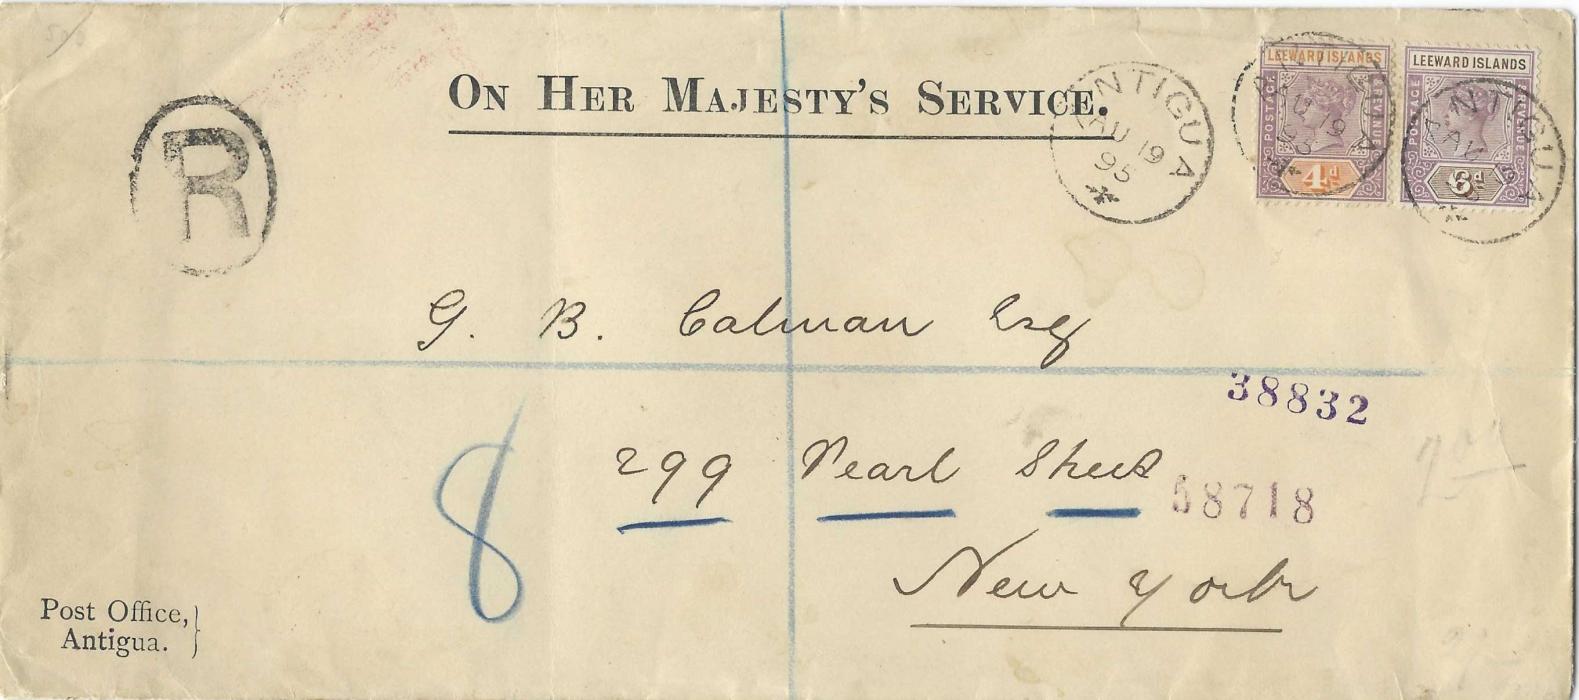 Antigua (Leeward Islands) 1895 On Her Majesty’s Service registered cover to New York franked Leeward Islands 4d. and 6d. tied by good strike of cds with another strike alongside, reverse with various New York cancels; no vertical creasing.